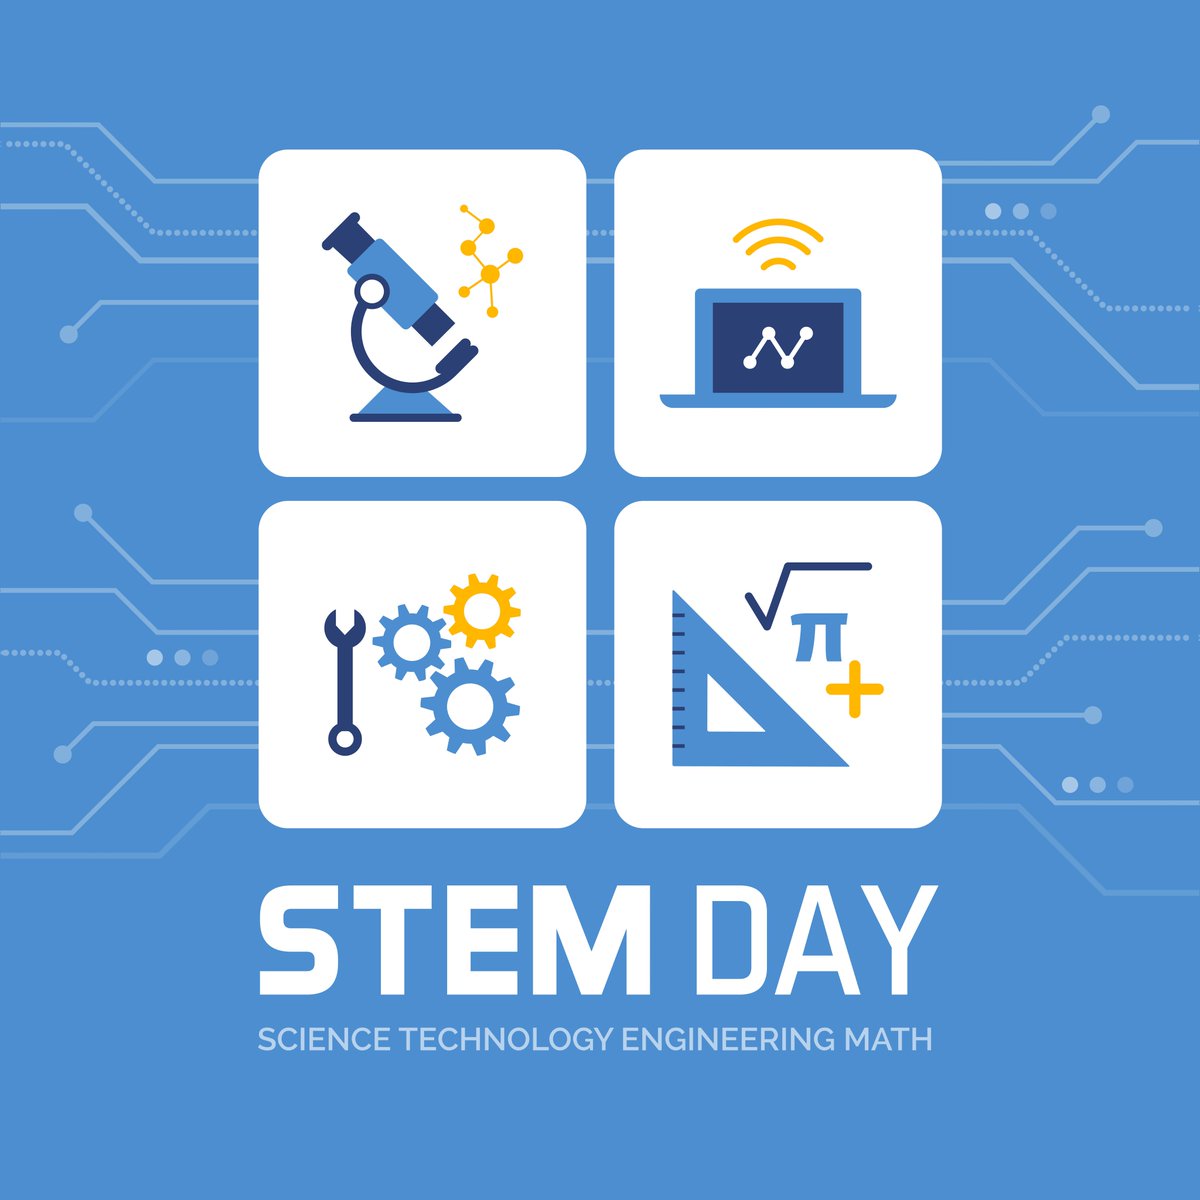 Celebrating the innovators, problem solvers, and creators who make STEM fields shine on STEM Day!🚀 🔬  #STEMDay #Science #Technology #Engineering #Math #IndependentSchools #IndySchools #Educators